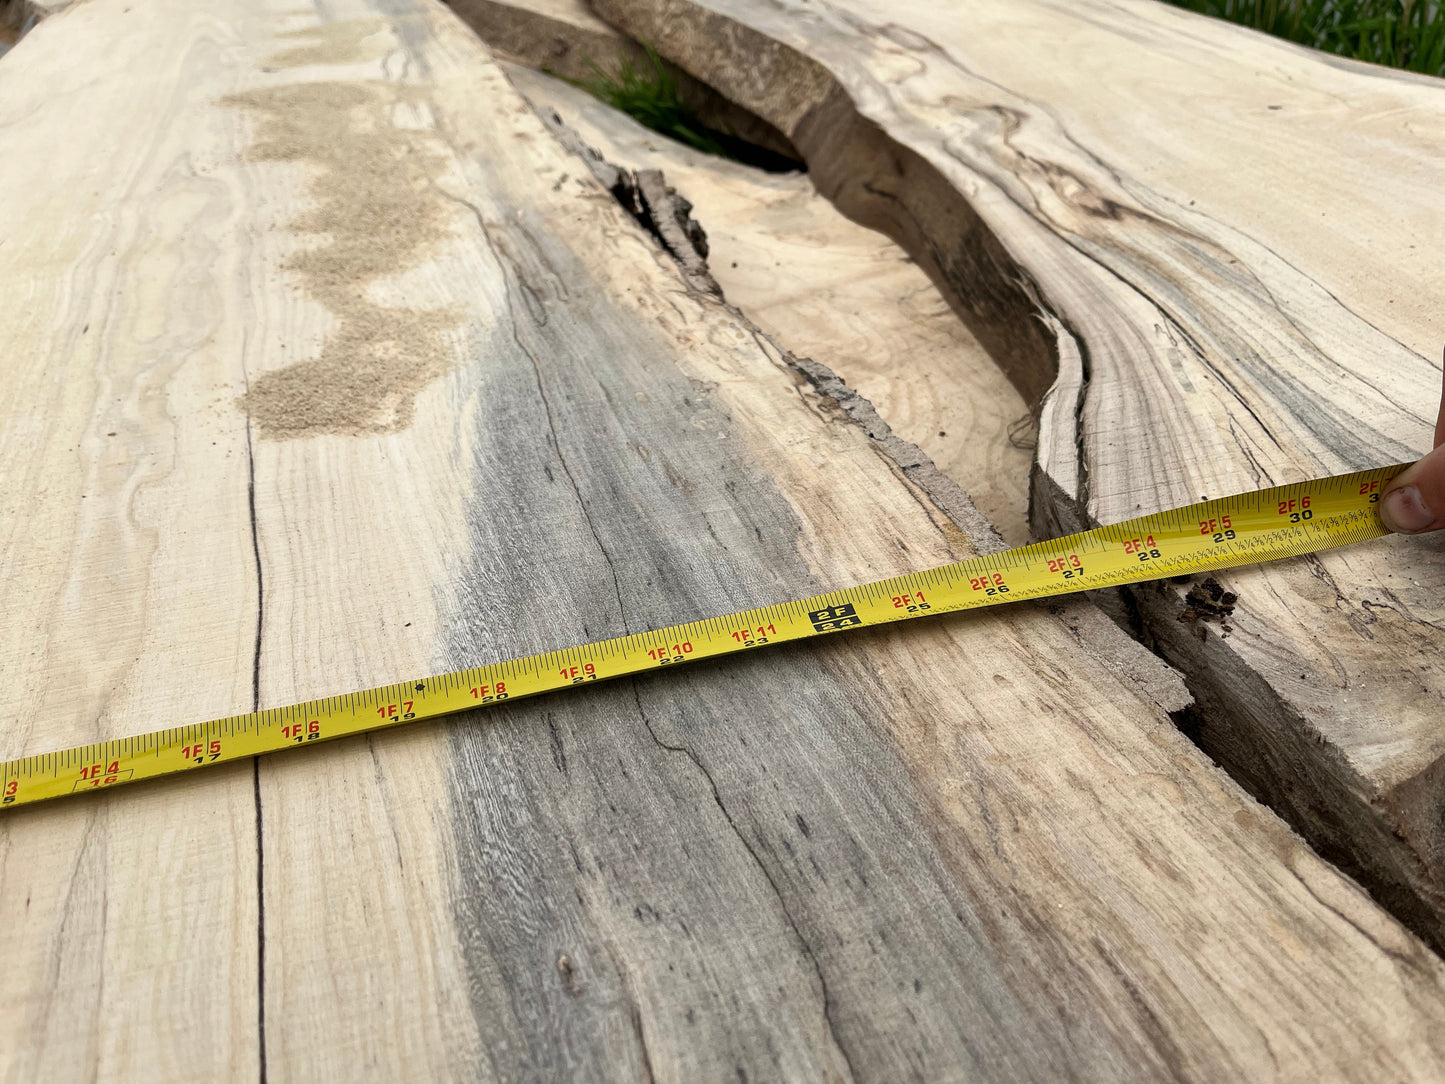 2" Thick Planed Pecan Live Edge Slabs for Charcuterie Boards, Furniture, Tables and Bar Tops, Shelves, and More - Kiln Dried